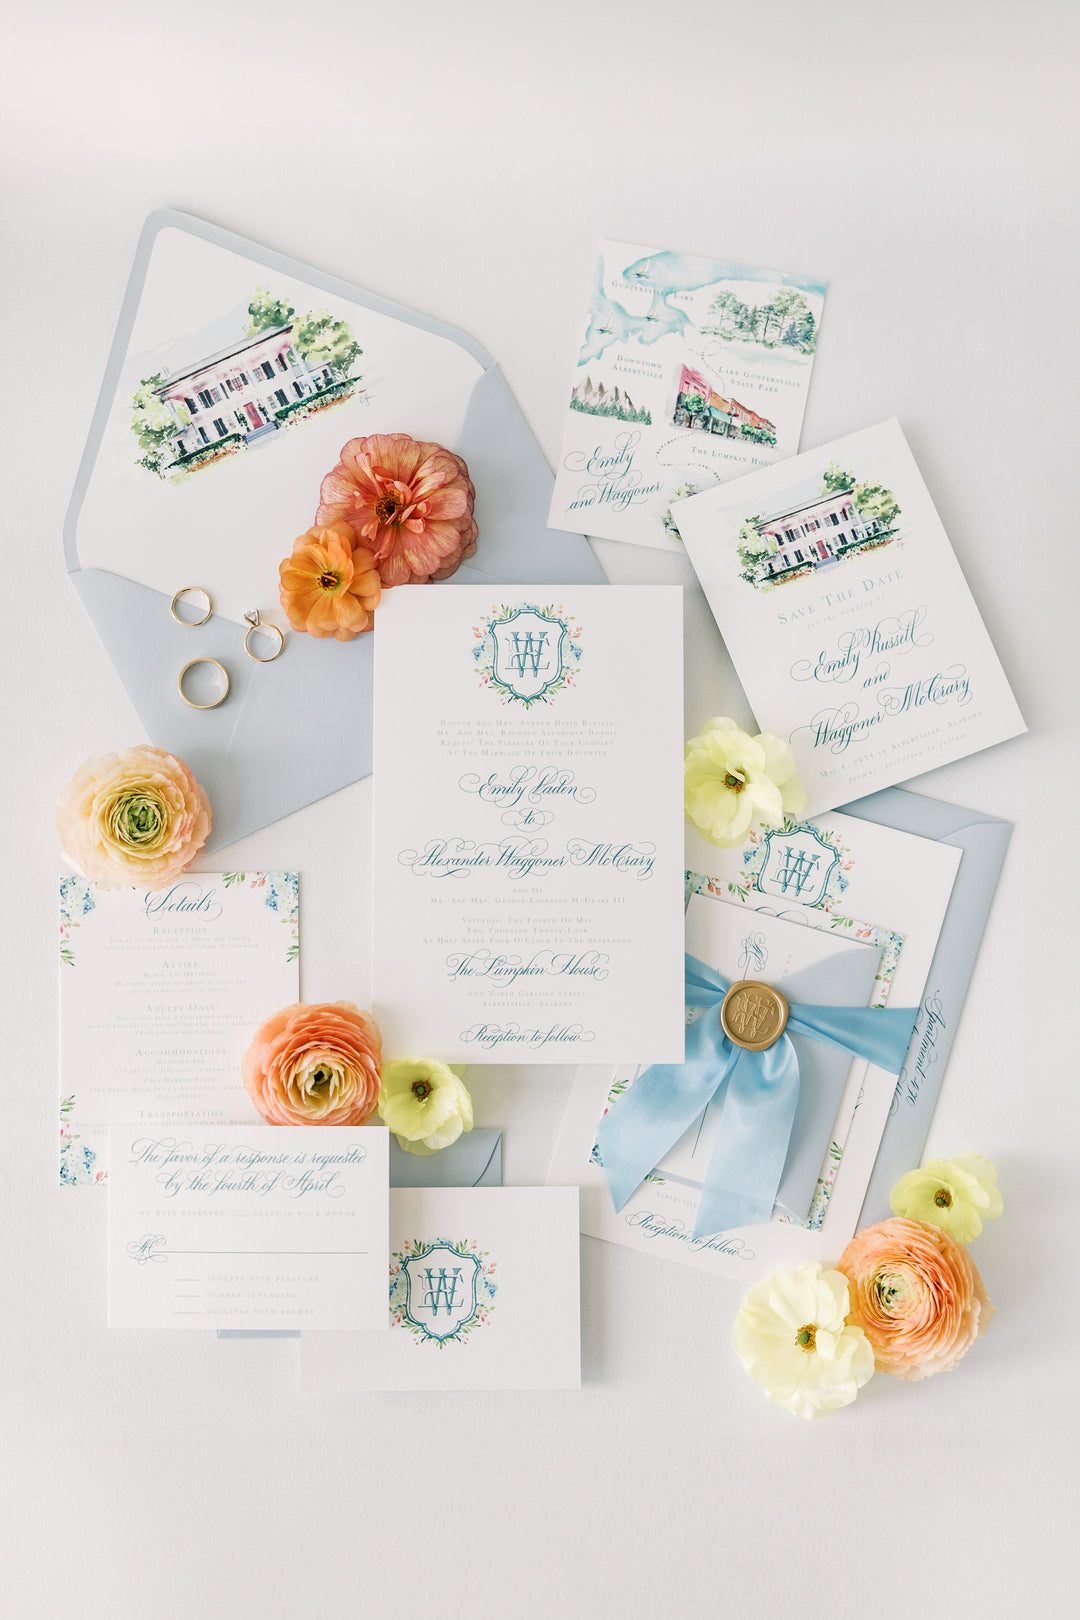 What You Need To Include In Your Wedding Invitation